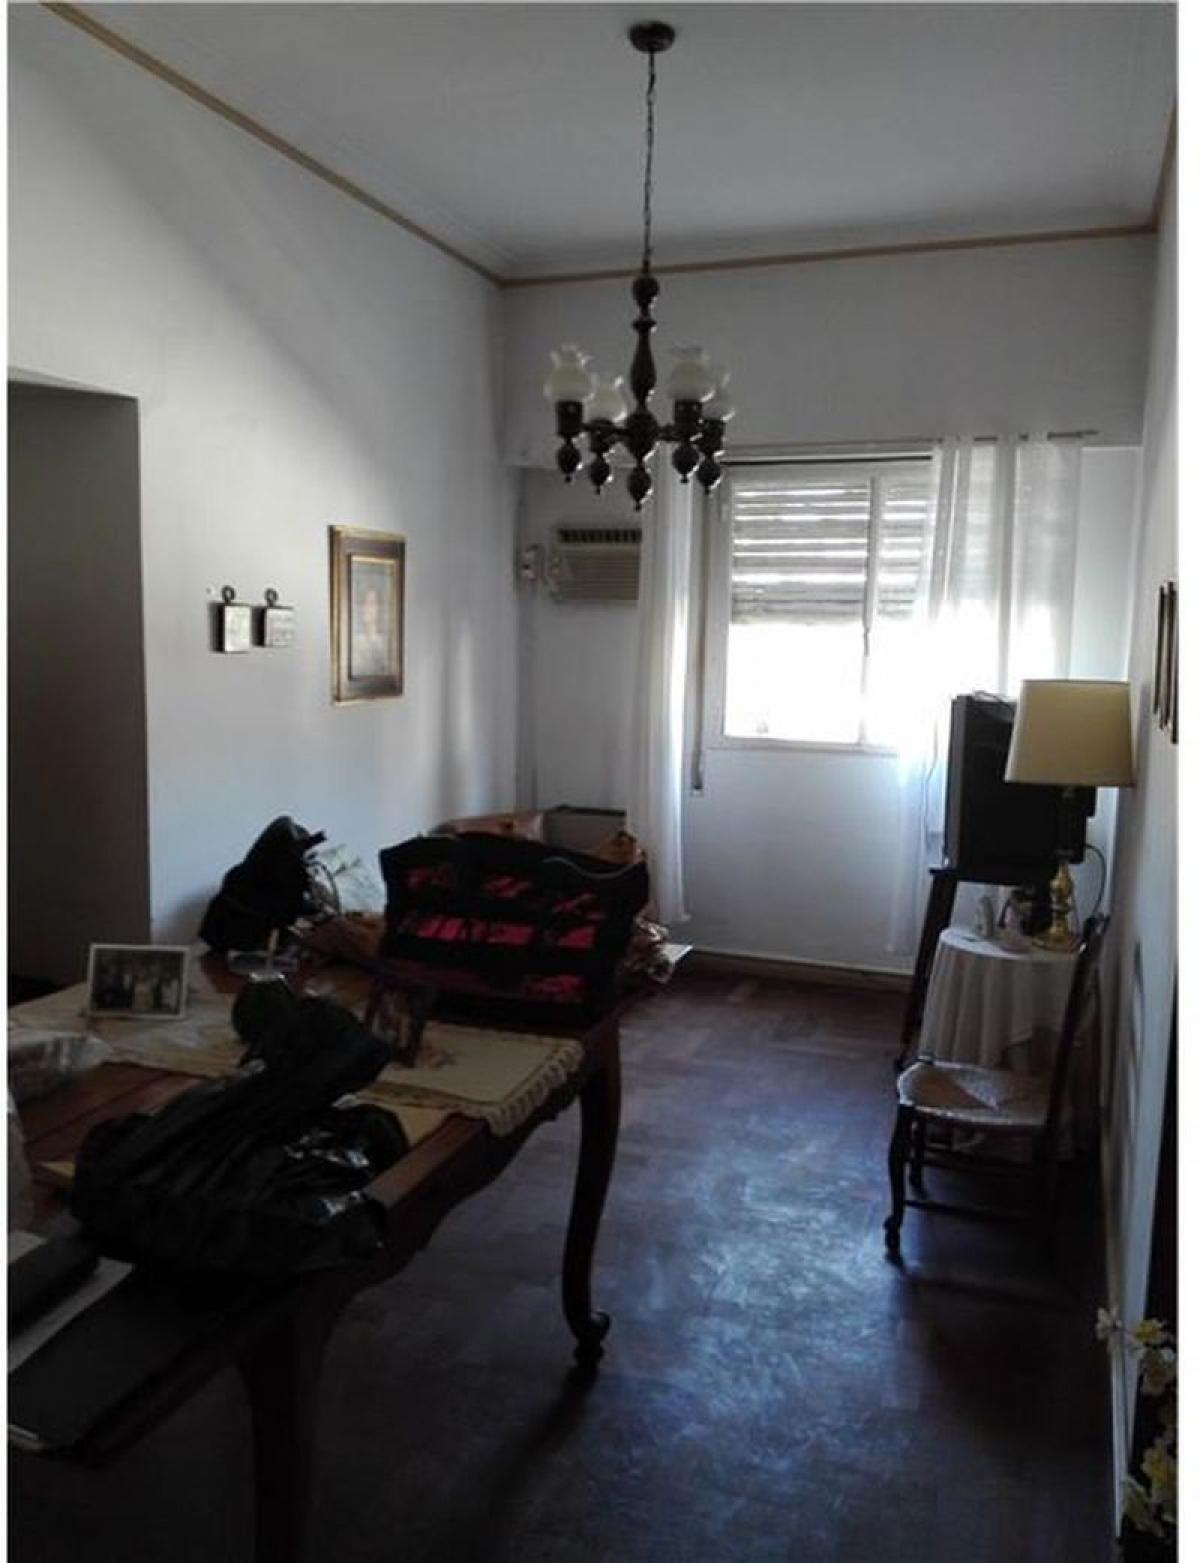 Picture of Apartment For Sale in Chascomus, Buenos Aires, Argentina